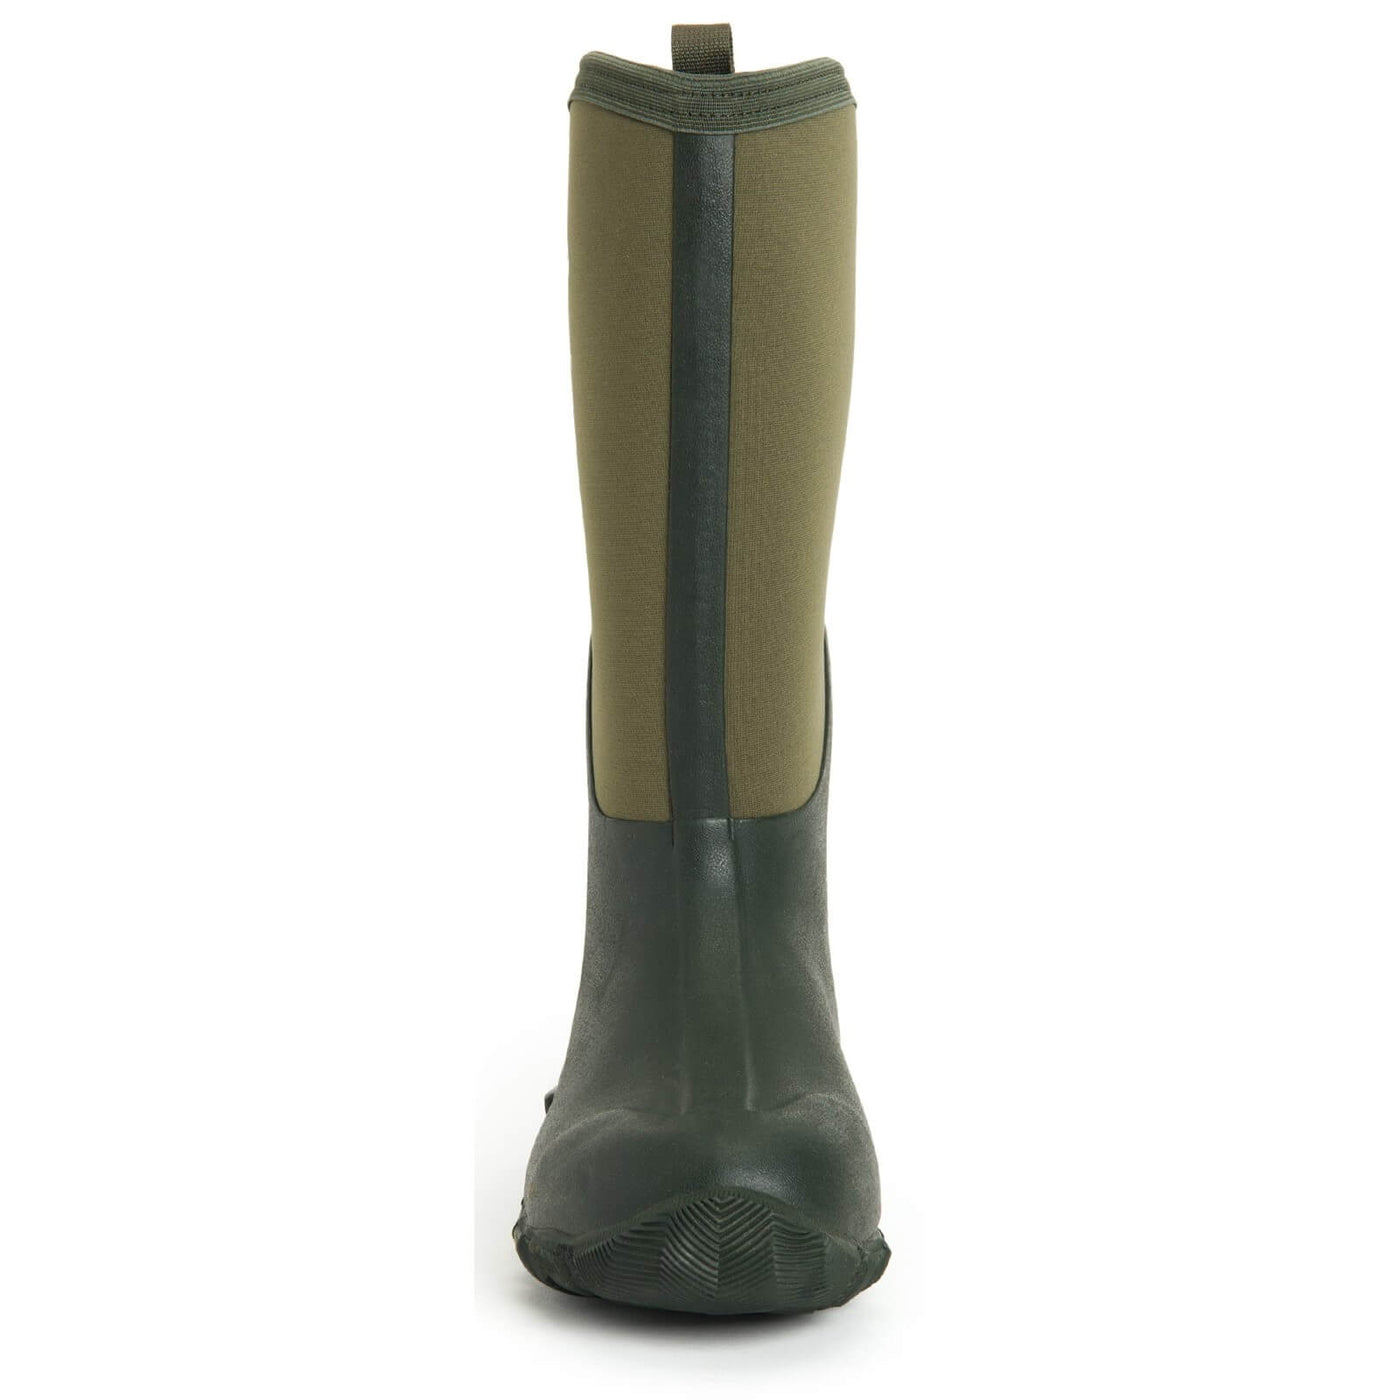 Muck Boots Edgewater II Multi Purpose Boots Moss 3#colour_moss-army-green